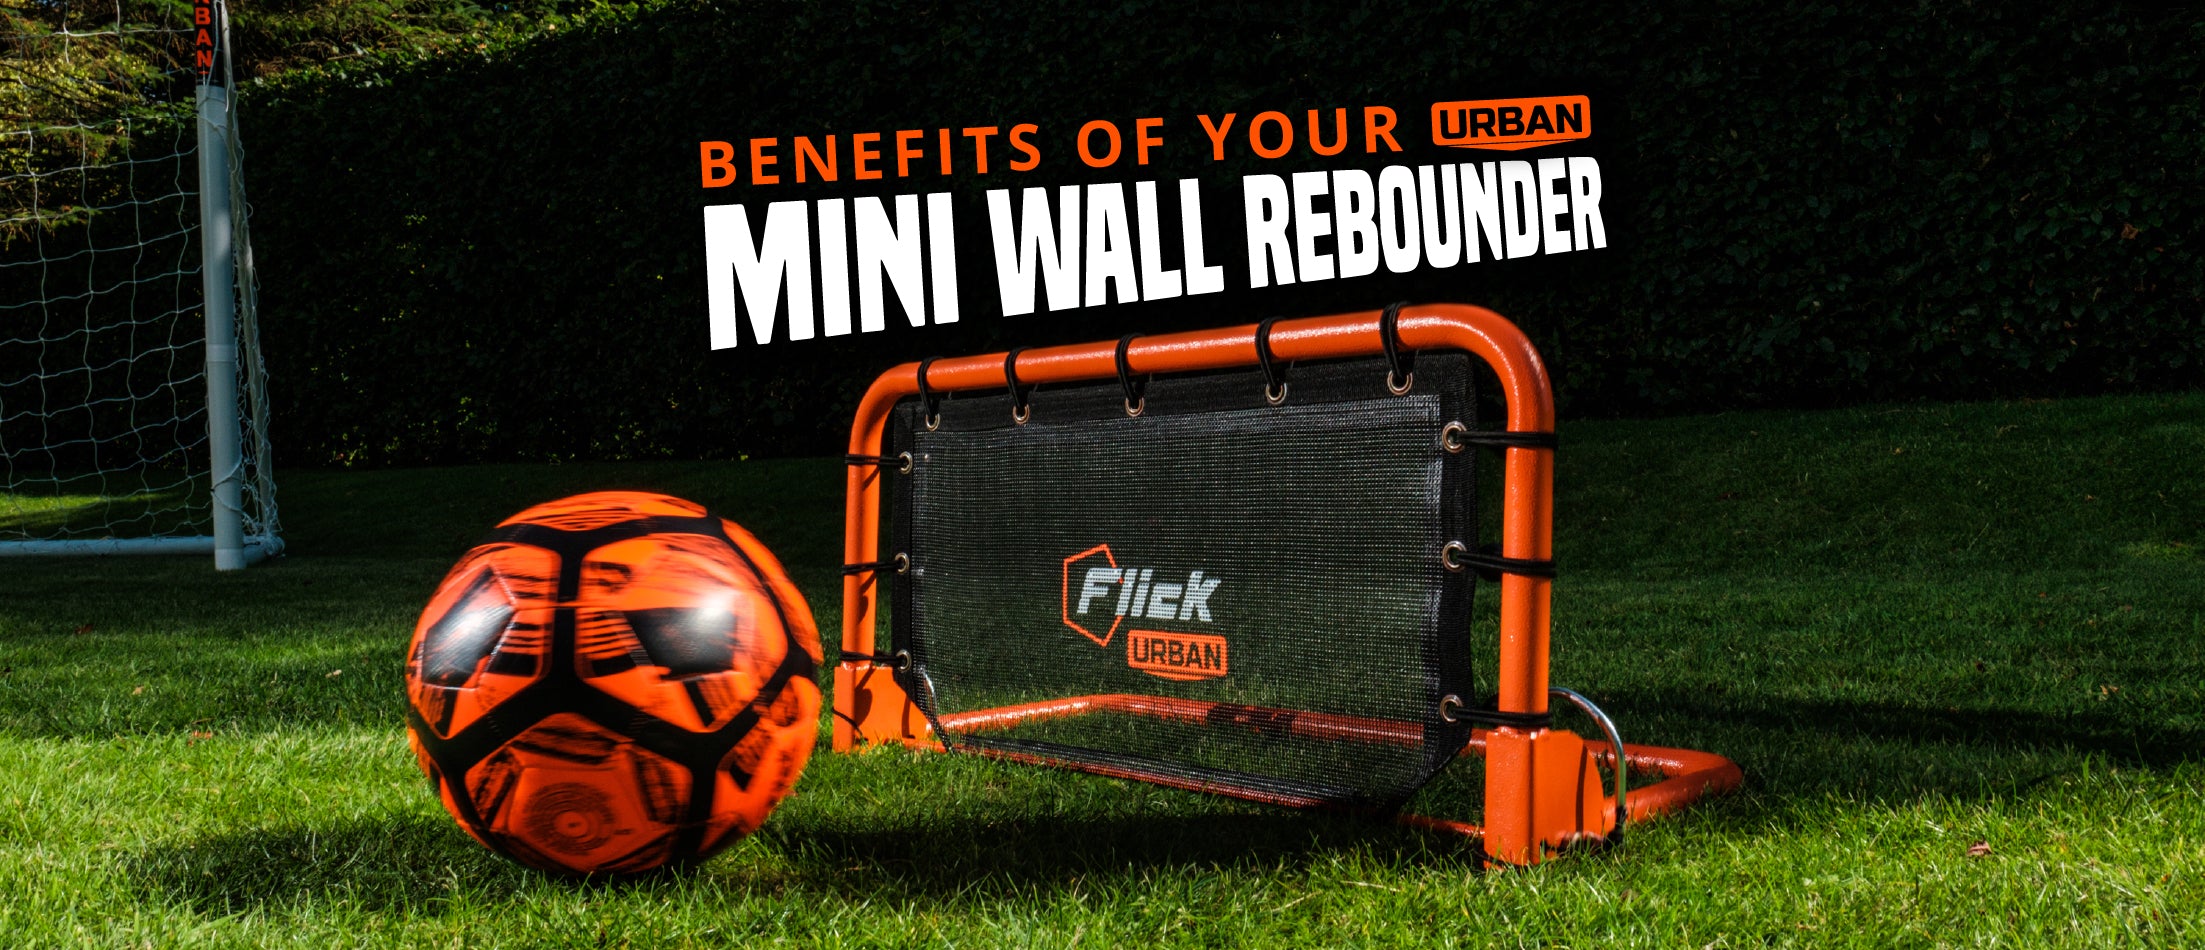 Benefits of your Urban Mini Wall Rebounder